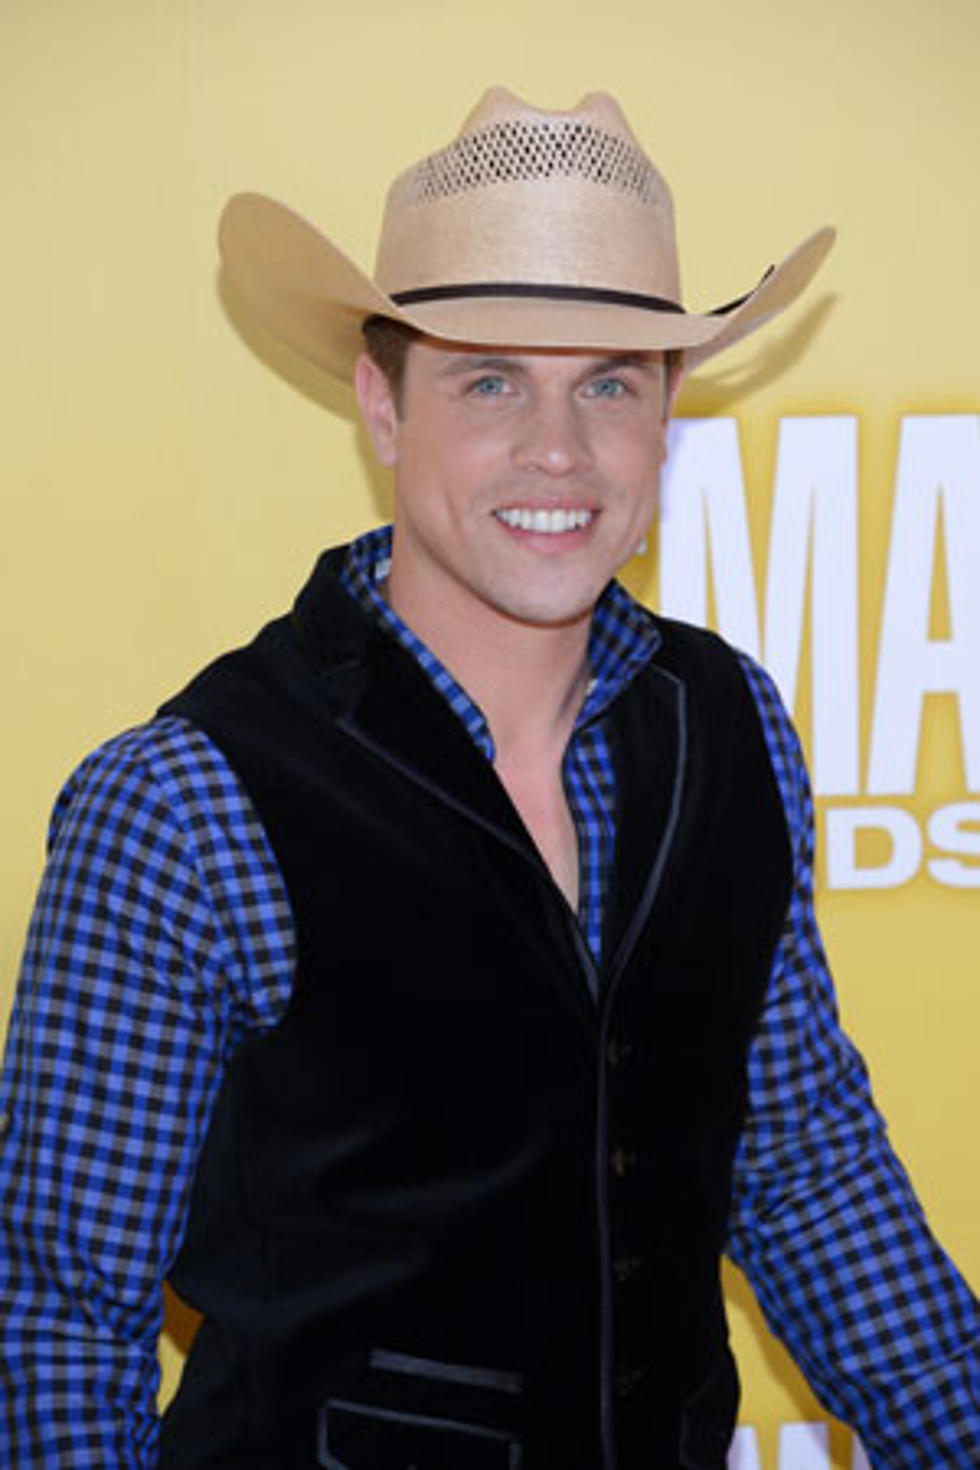 Sing Cowboys and Angels – And You Could Win Dustin Lynch Tickets